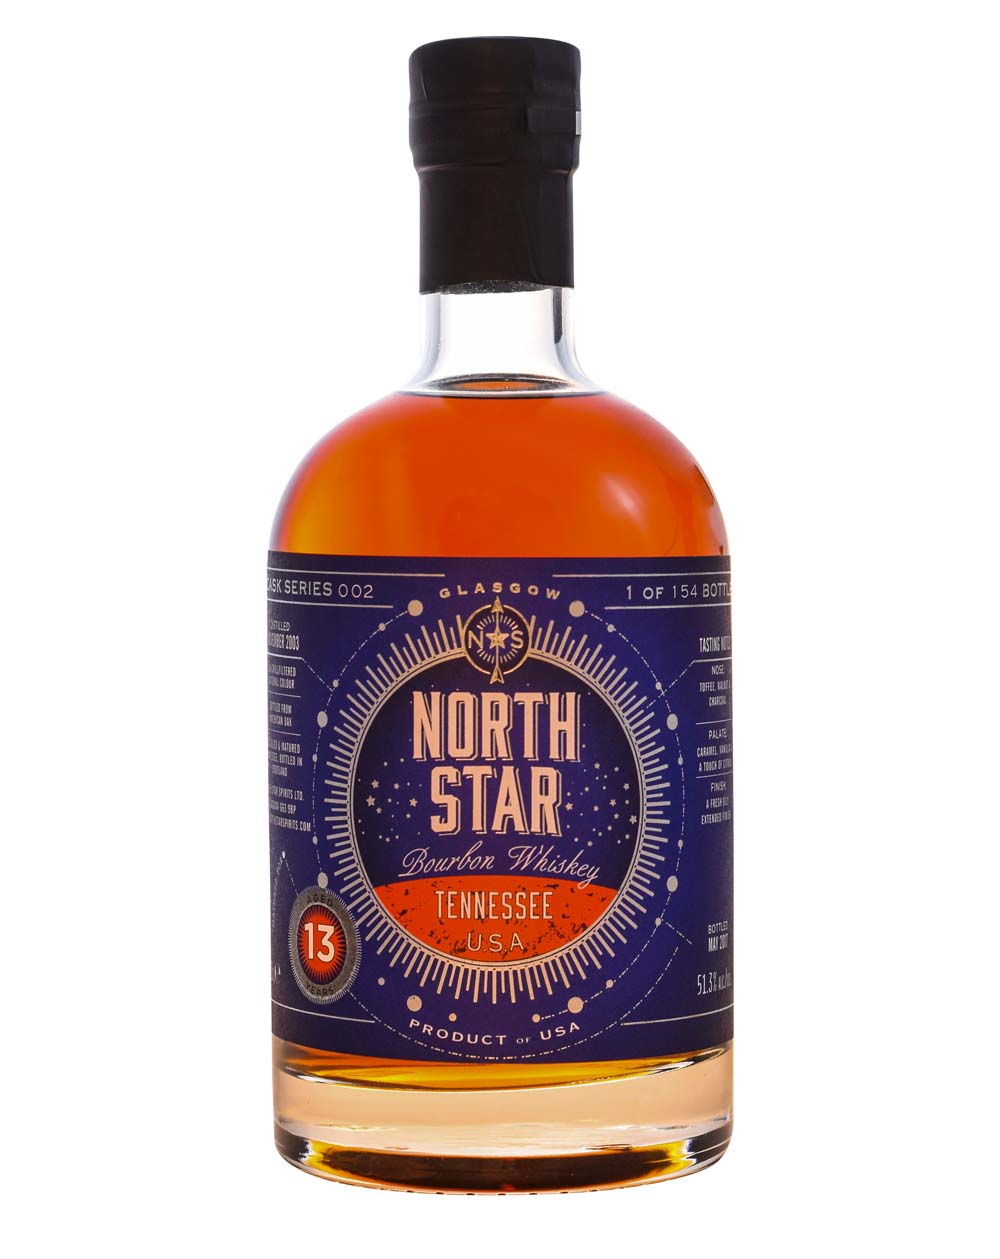 North Star Tennessee Whiskey